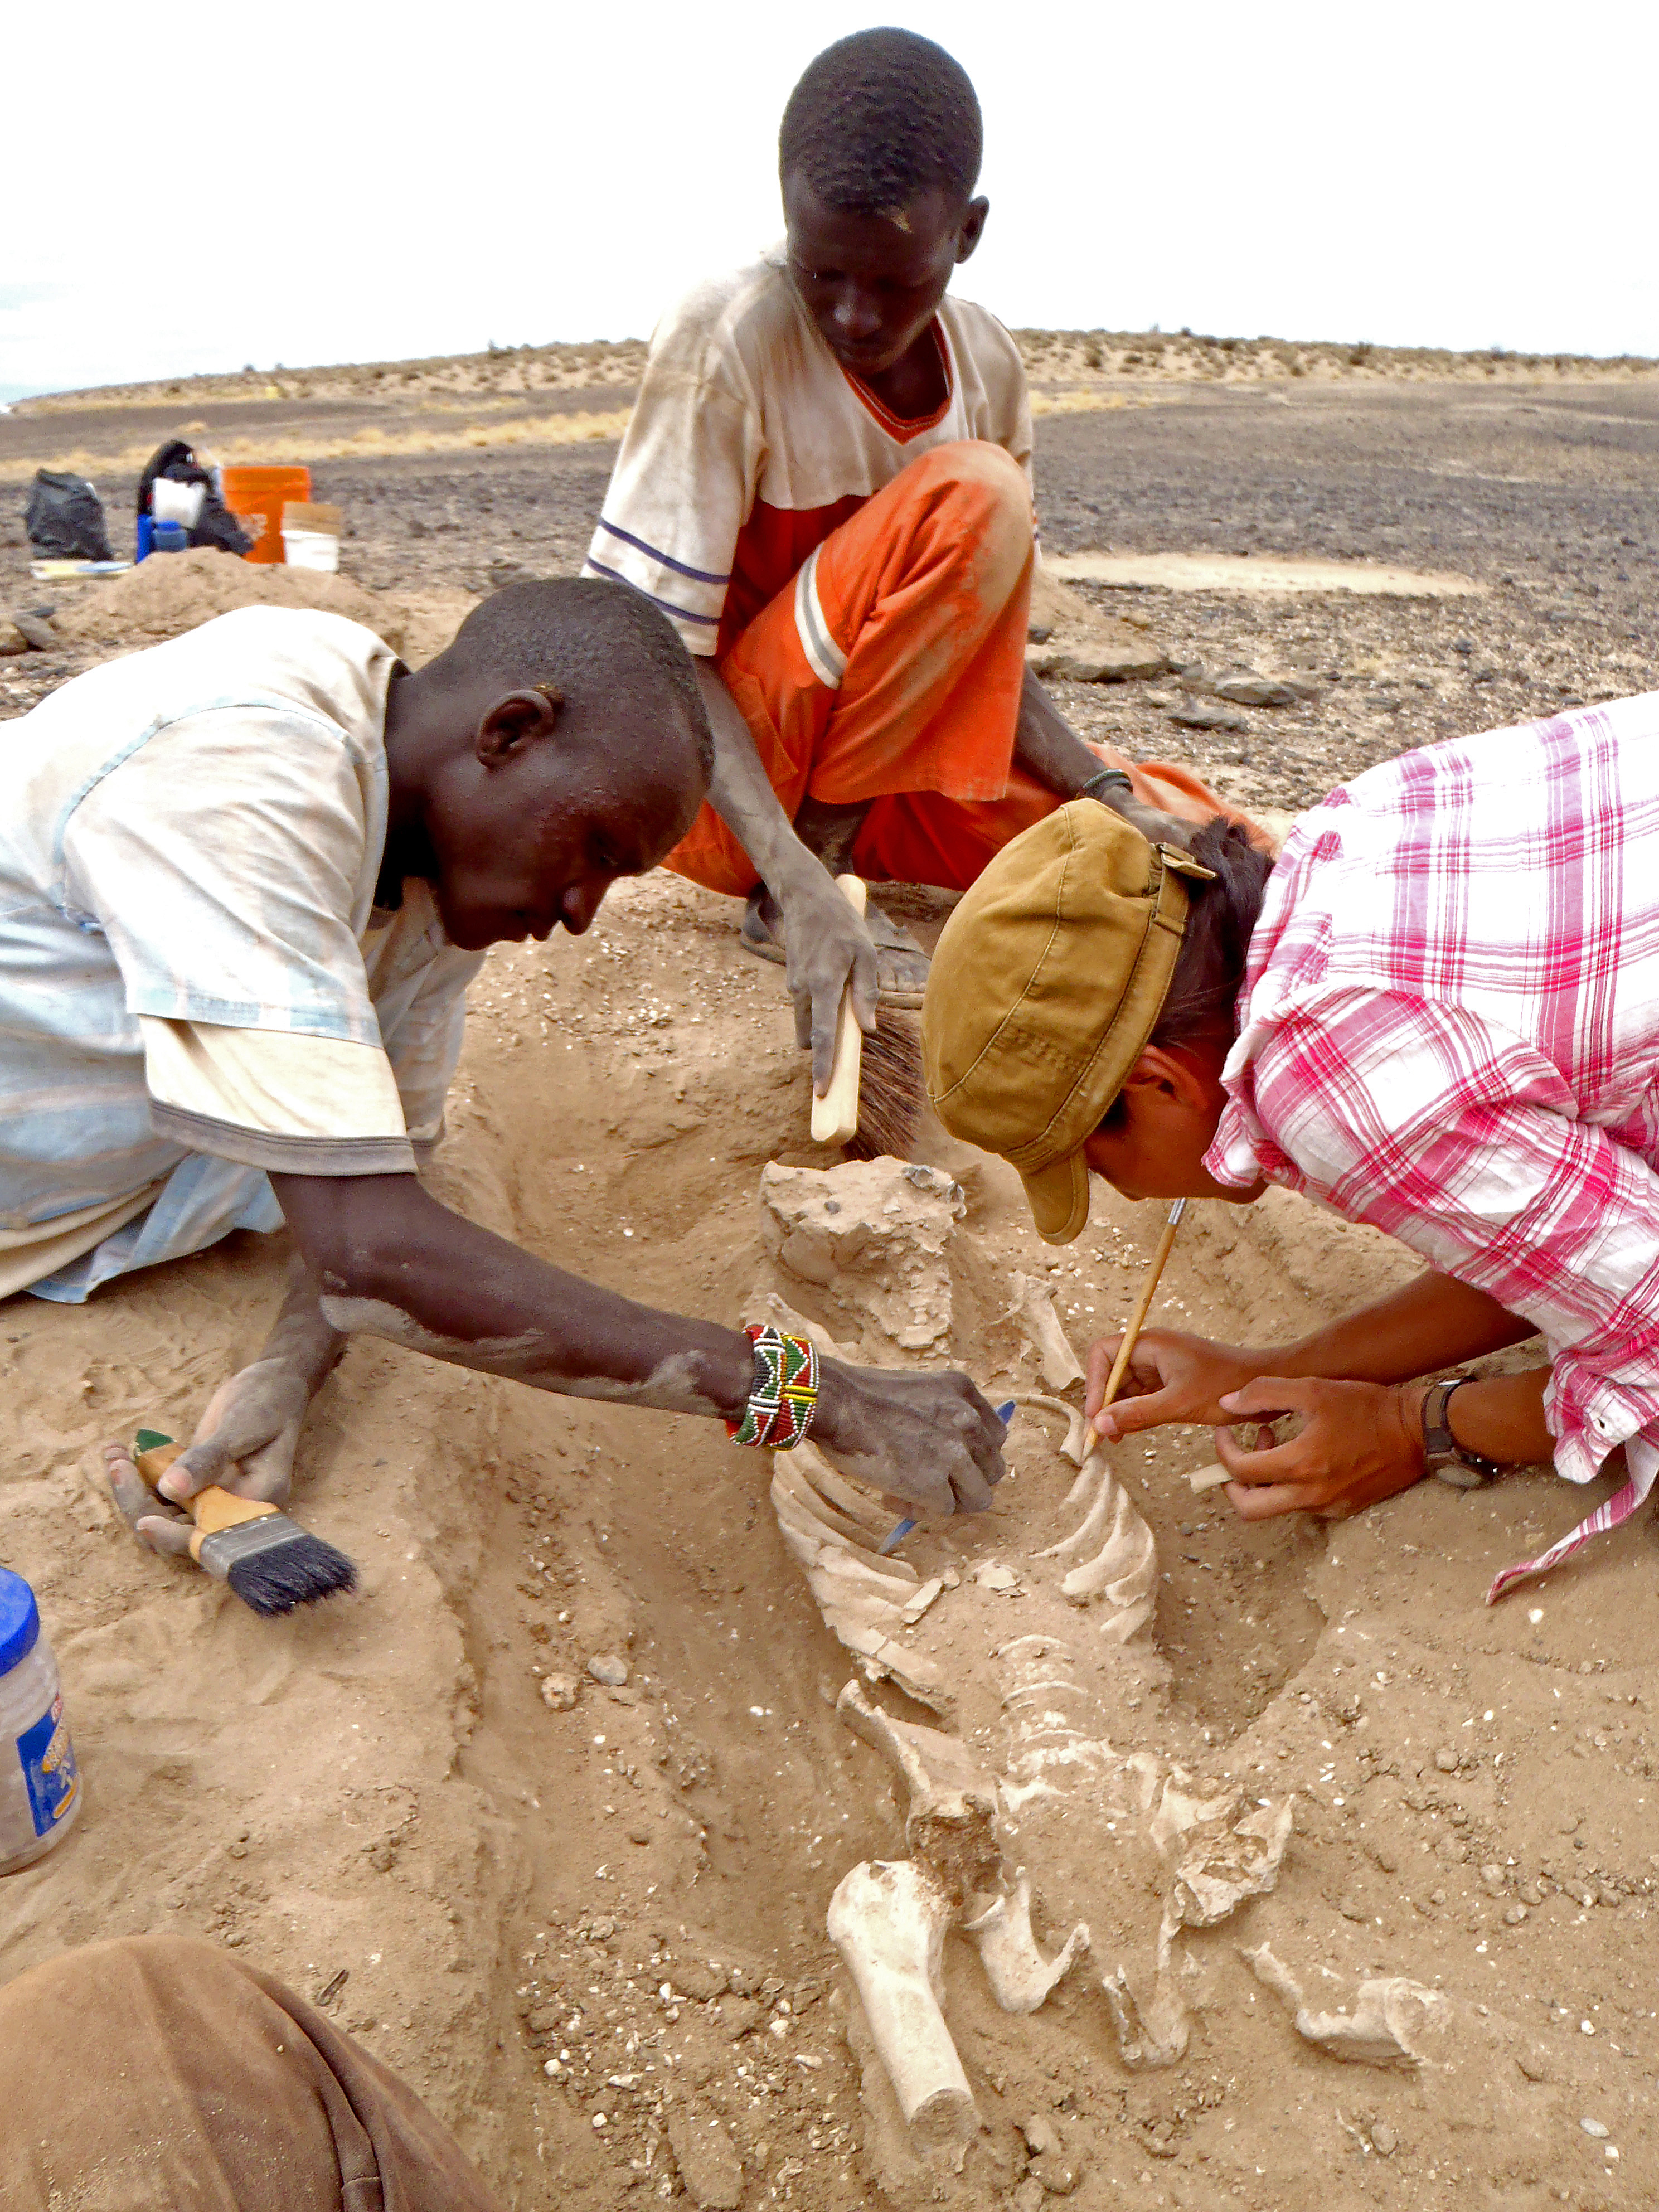 In this August 2012 photo provided by Marta Mirazon Lahr, researcher Frances Rivera, right, Michael Emsugut, left, and Tot Ekulukum excavate a human skeleton at the site of Nataruk, West Turkana, Kenya. This skeleton was that of a woman, found lying on her back, with lesions on her neck vertebrae consistent with a projectile wound. She also had multiple fractures on one of her hands. In a paper released on Jan. 20, 2016, by the Nature Journal, scientists said it’s one of the clearest cases of violence between groups among prehistoric hunter-gatherers. (Marta Mirazon Lahr—AP)